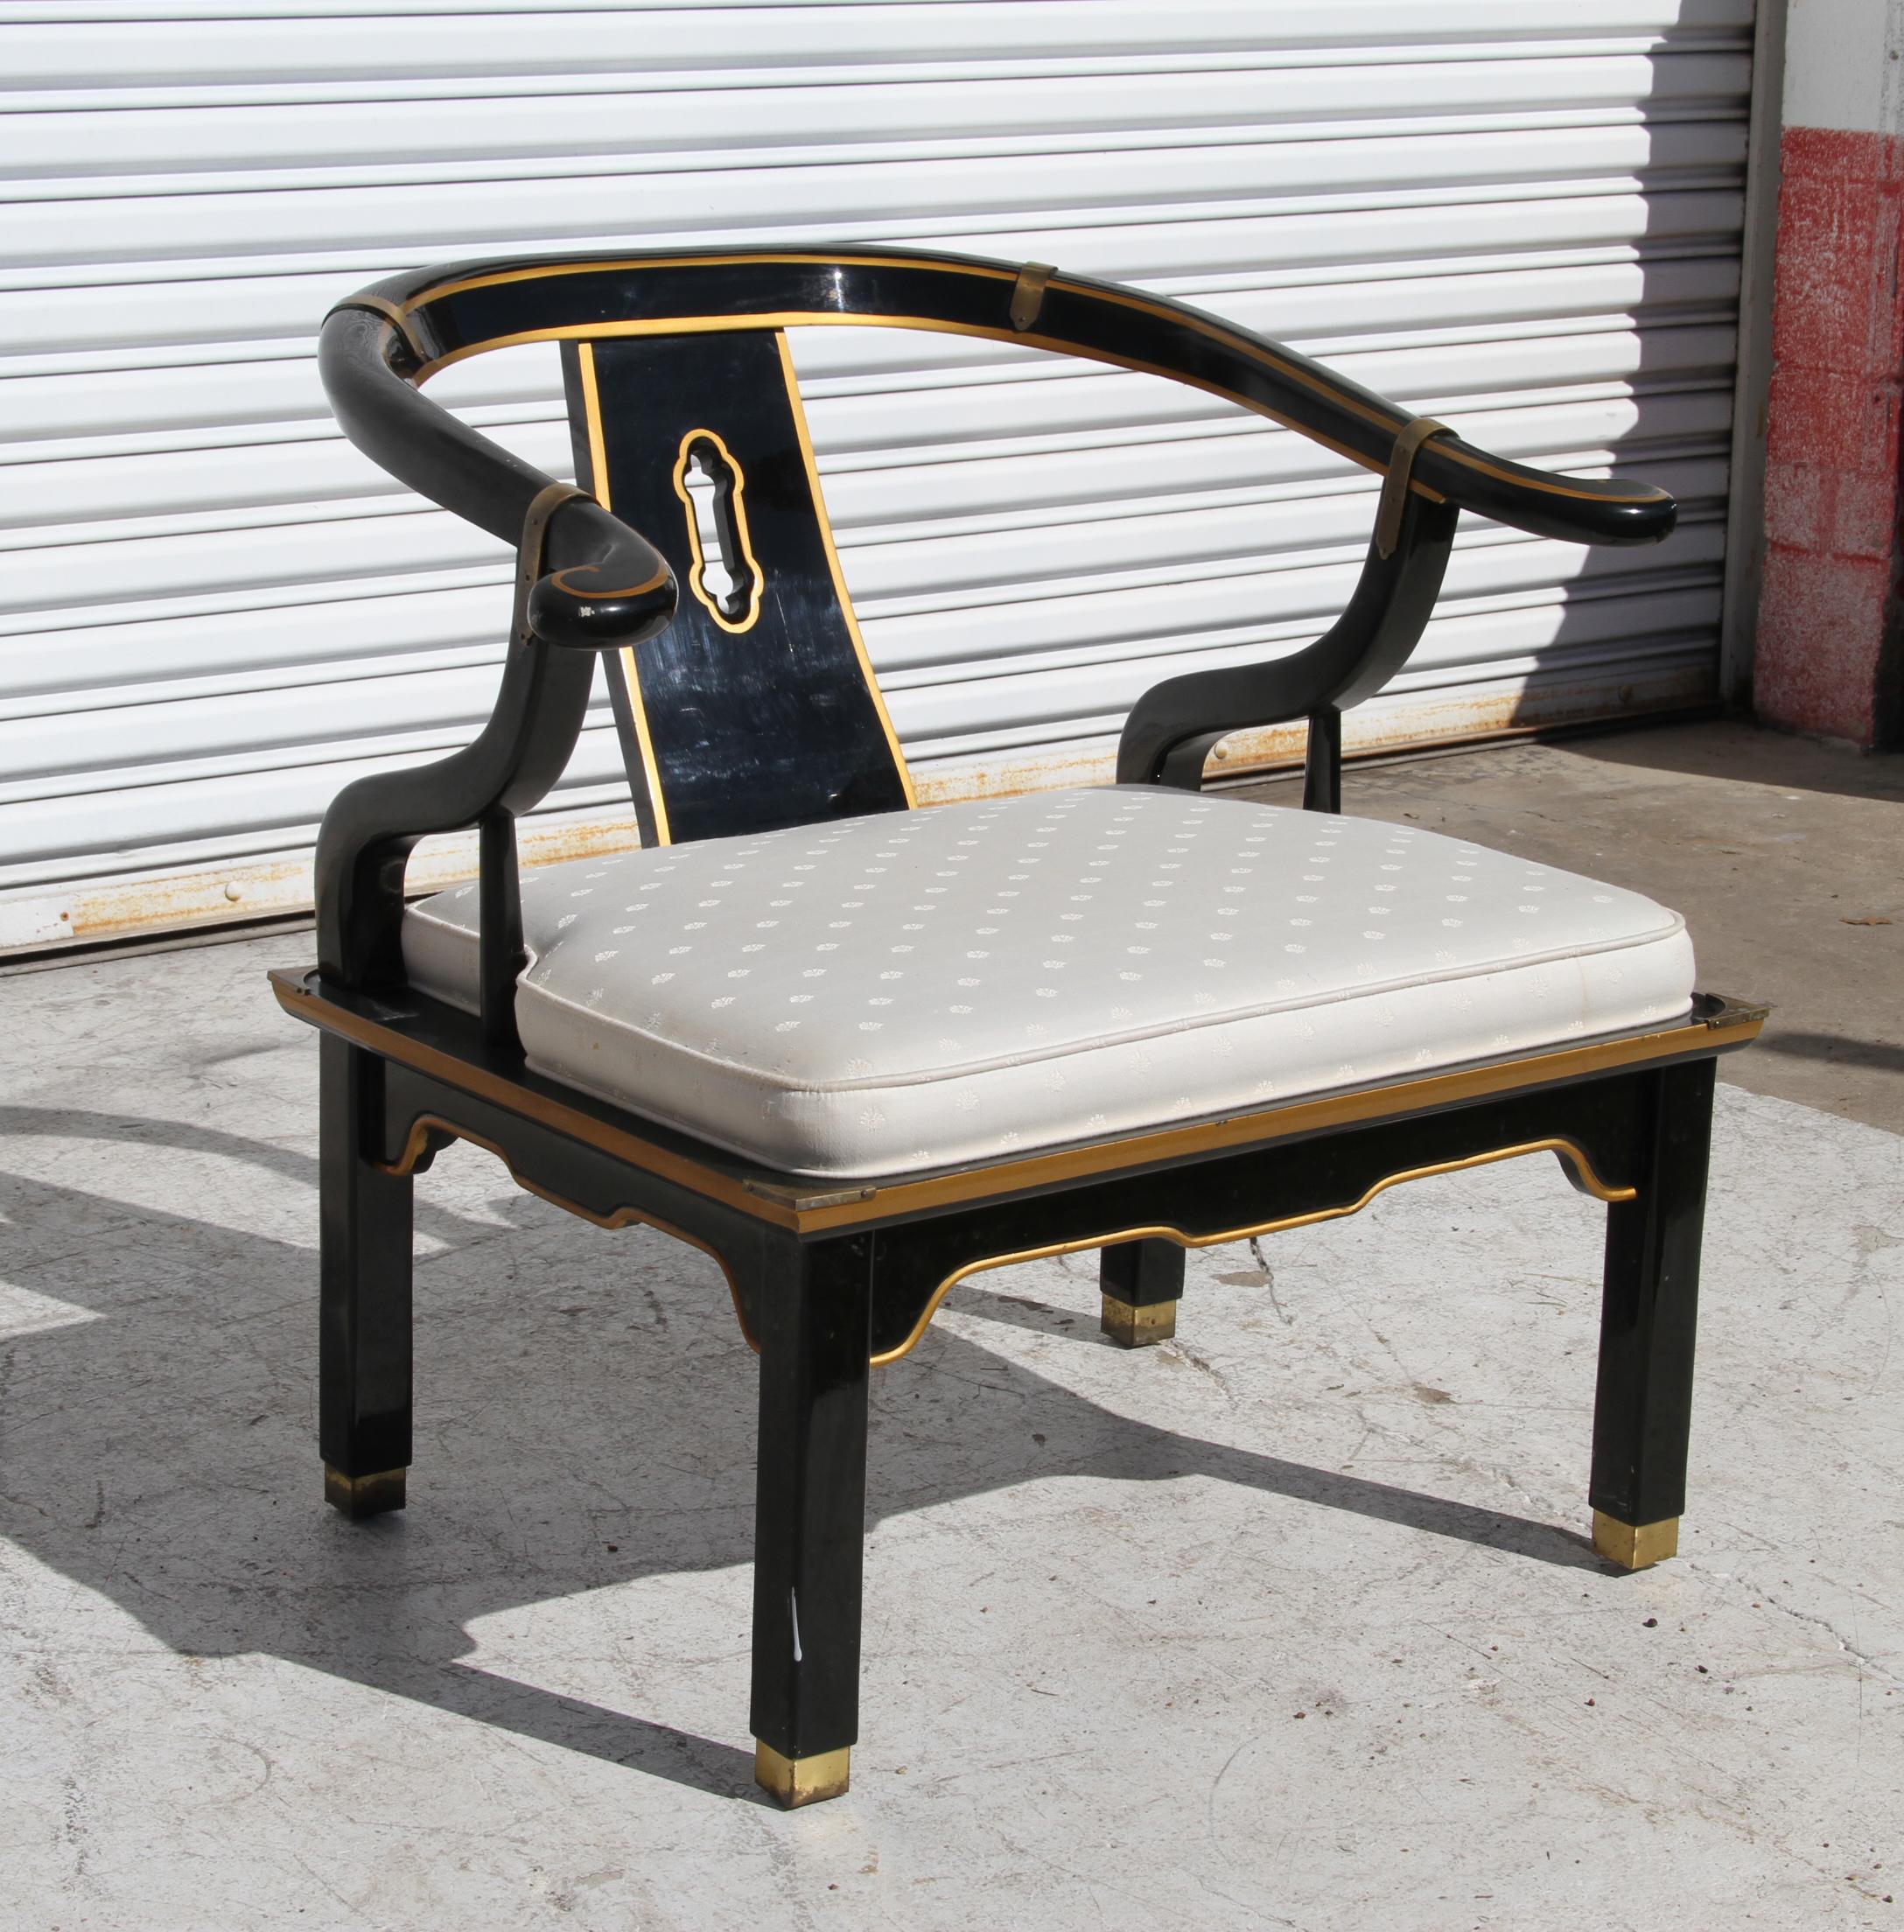 Ming style black lacquer & brass low chair after James Mont.

Ming style yoke back black lacquered low chair with square brass sabots in the style of James Mont. circa, midcentury-1970s.

Vintage Ming style low yoke back chair in the style of James